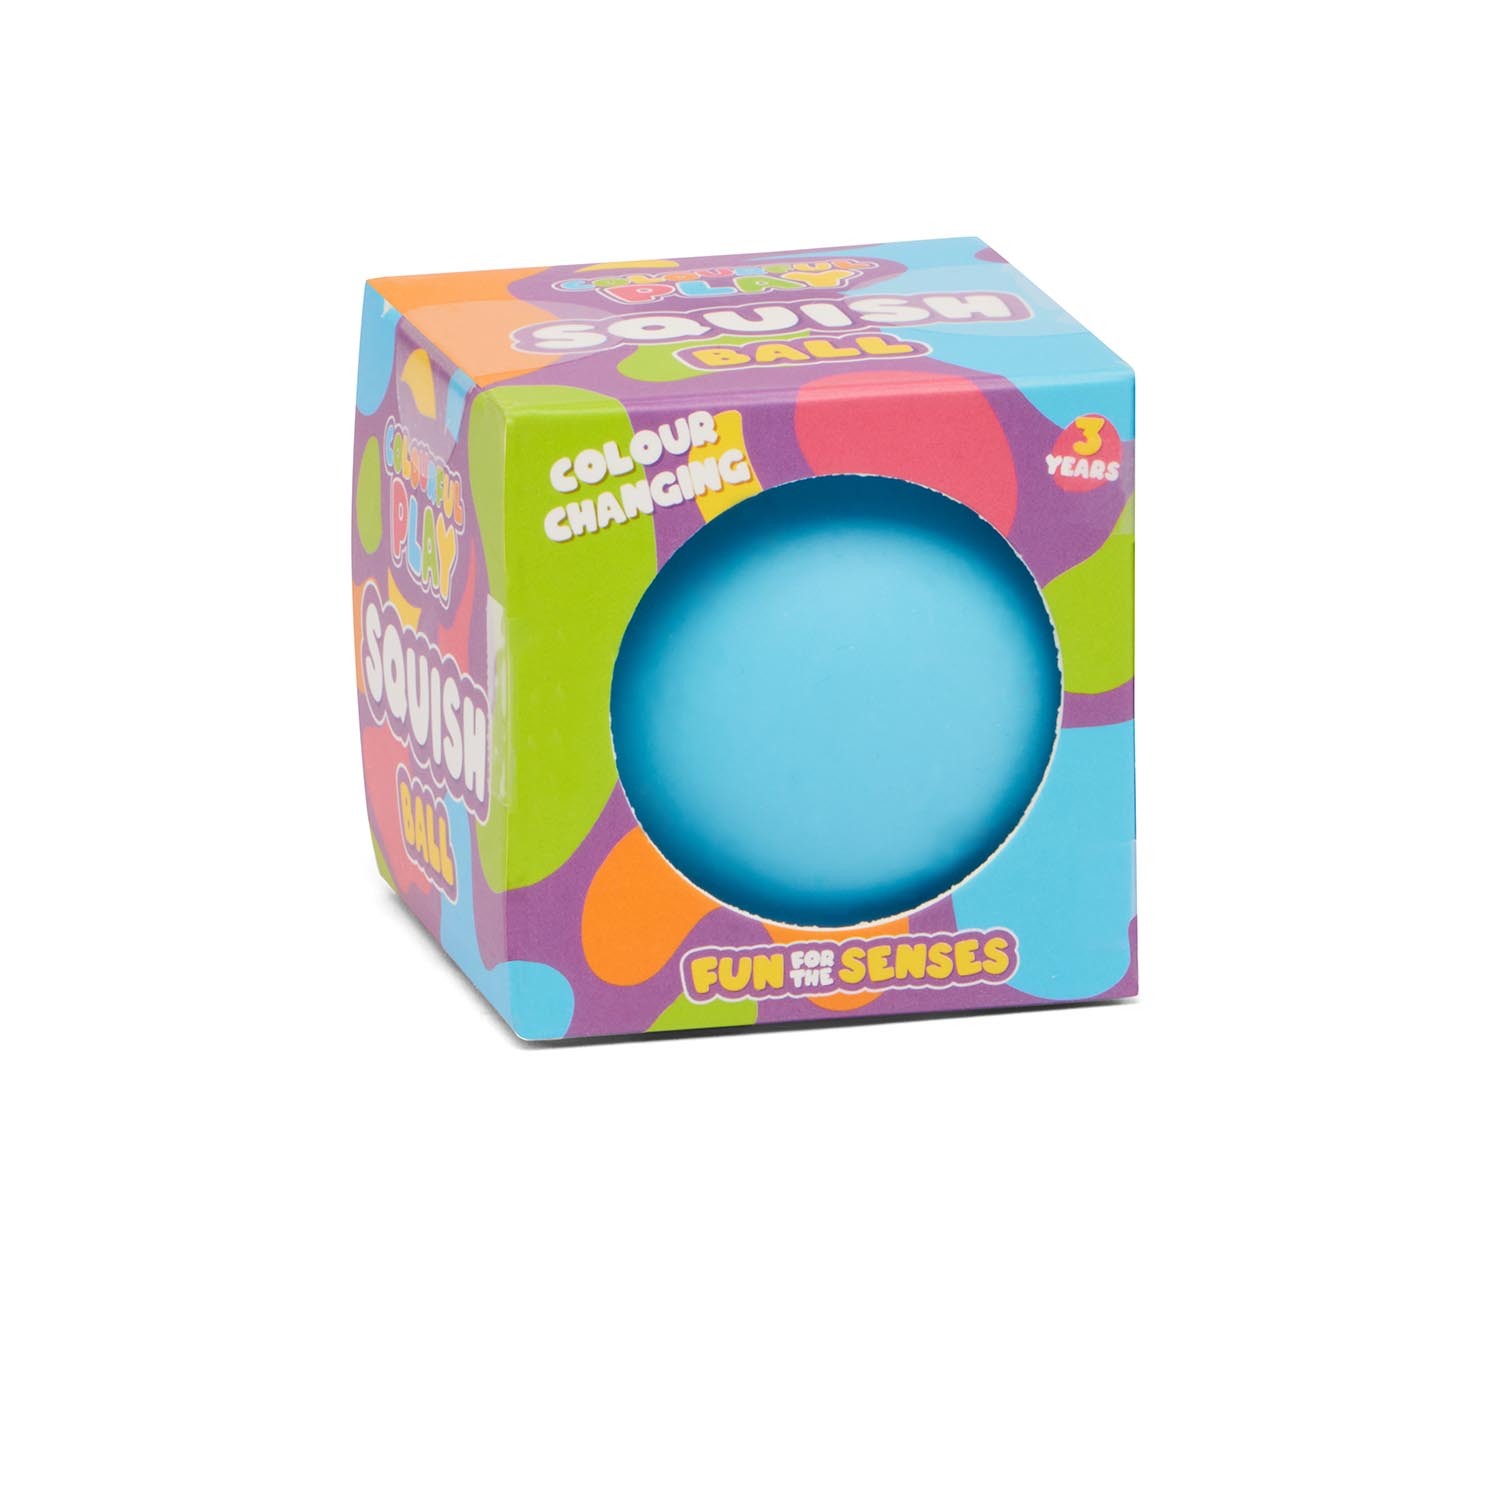 Single ToyMania Colour Changing Sensory Squish Ball in Assorted styles Image 6